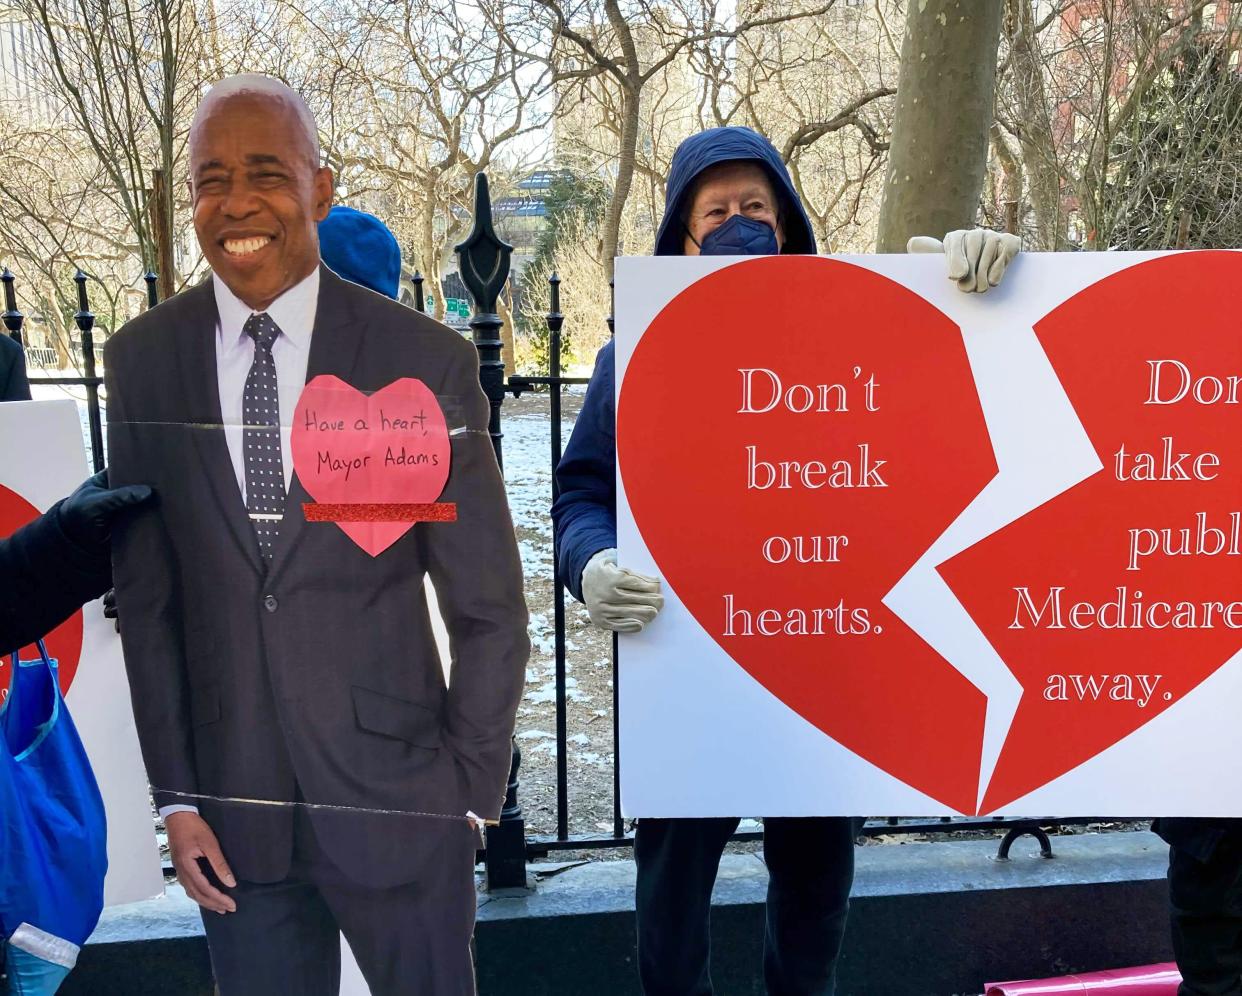 Retired city workers gathered near City Hall in lower Manhattan, New York on Monday, Feb. 14, 2022, to tell New York City Mayor Eric Adams he's breaking their hearts with his plan to change their beloved Medicare coverage. 